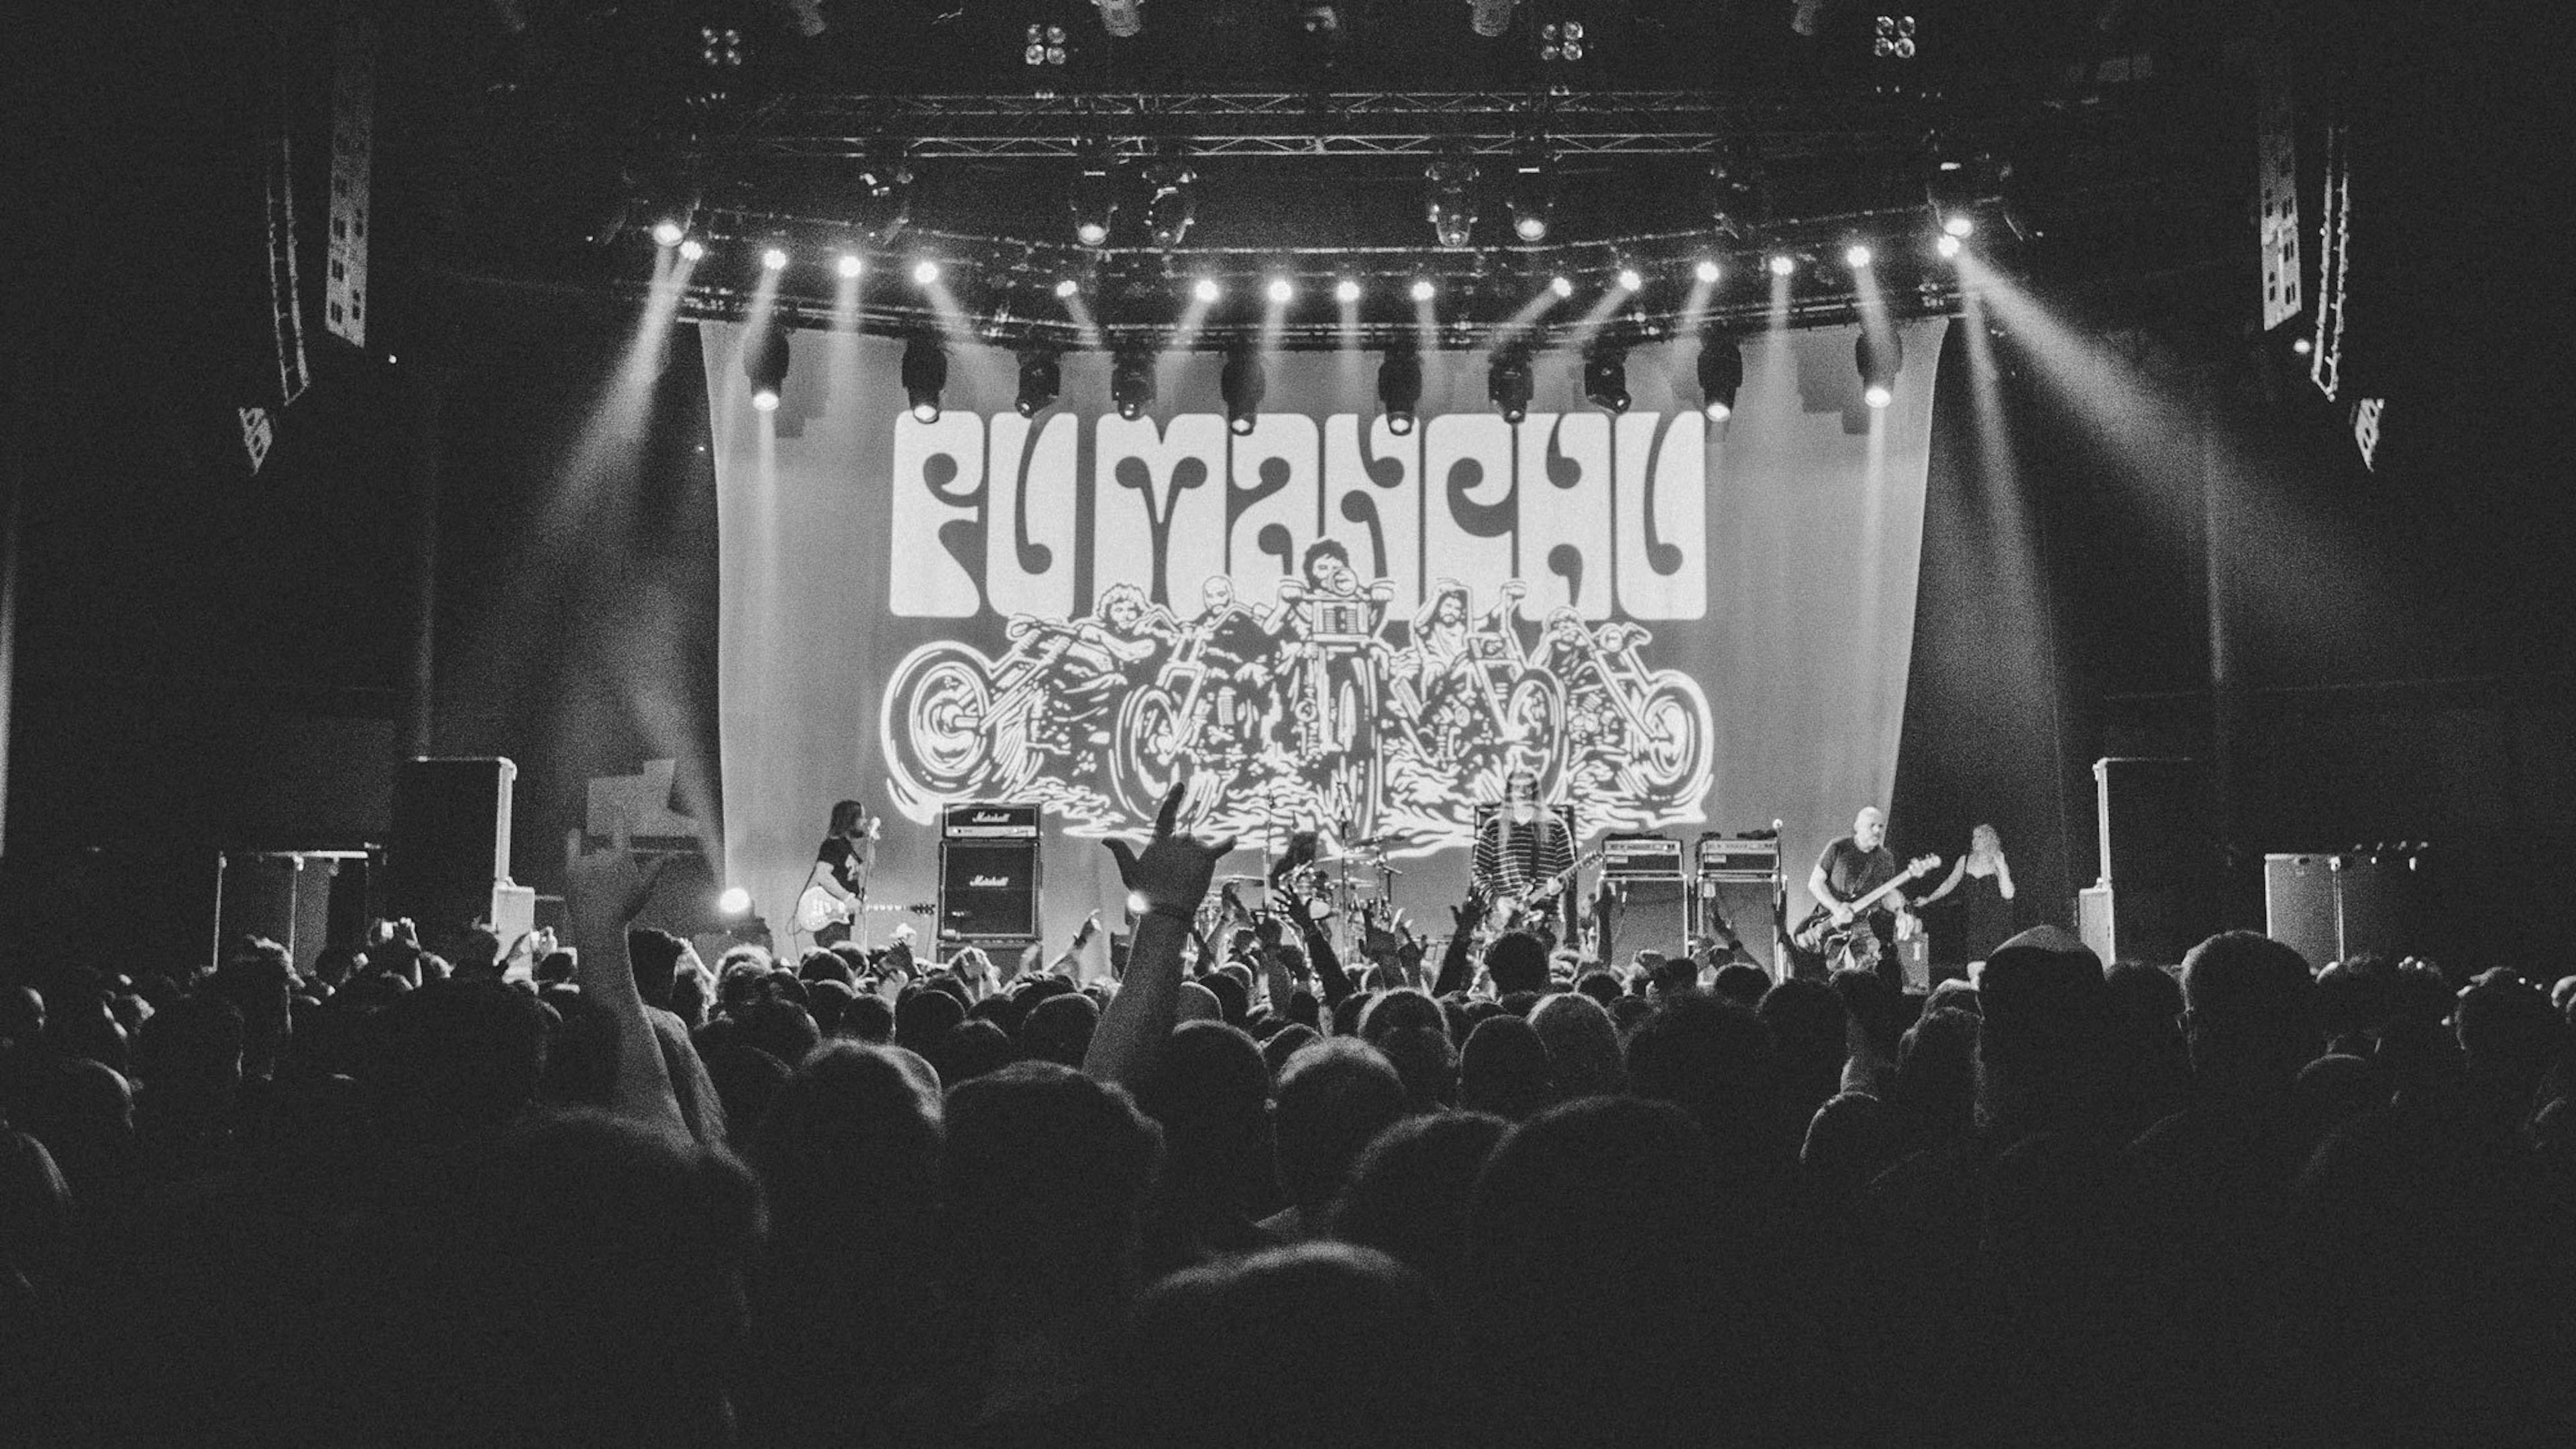 13 Things We Learned At Desertfest 2019